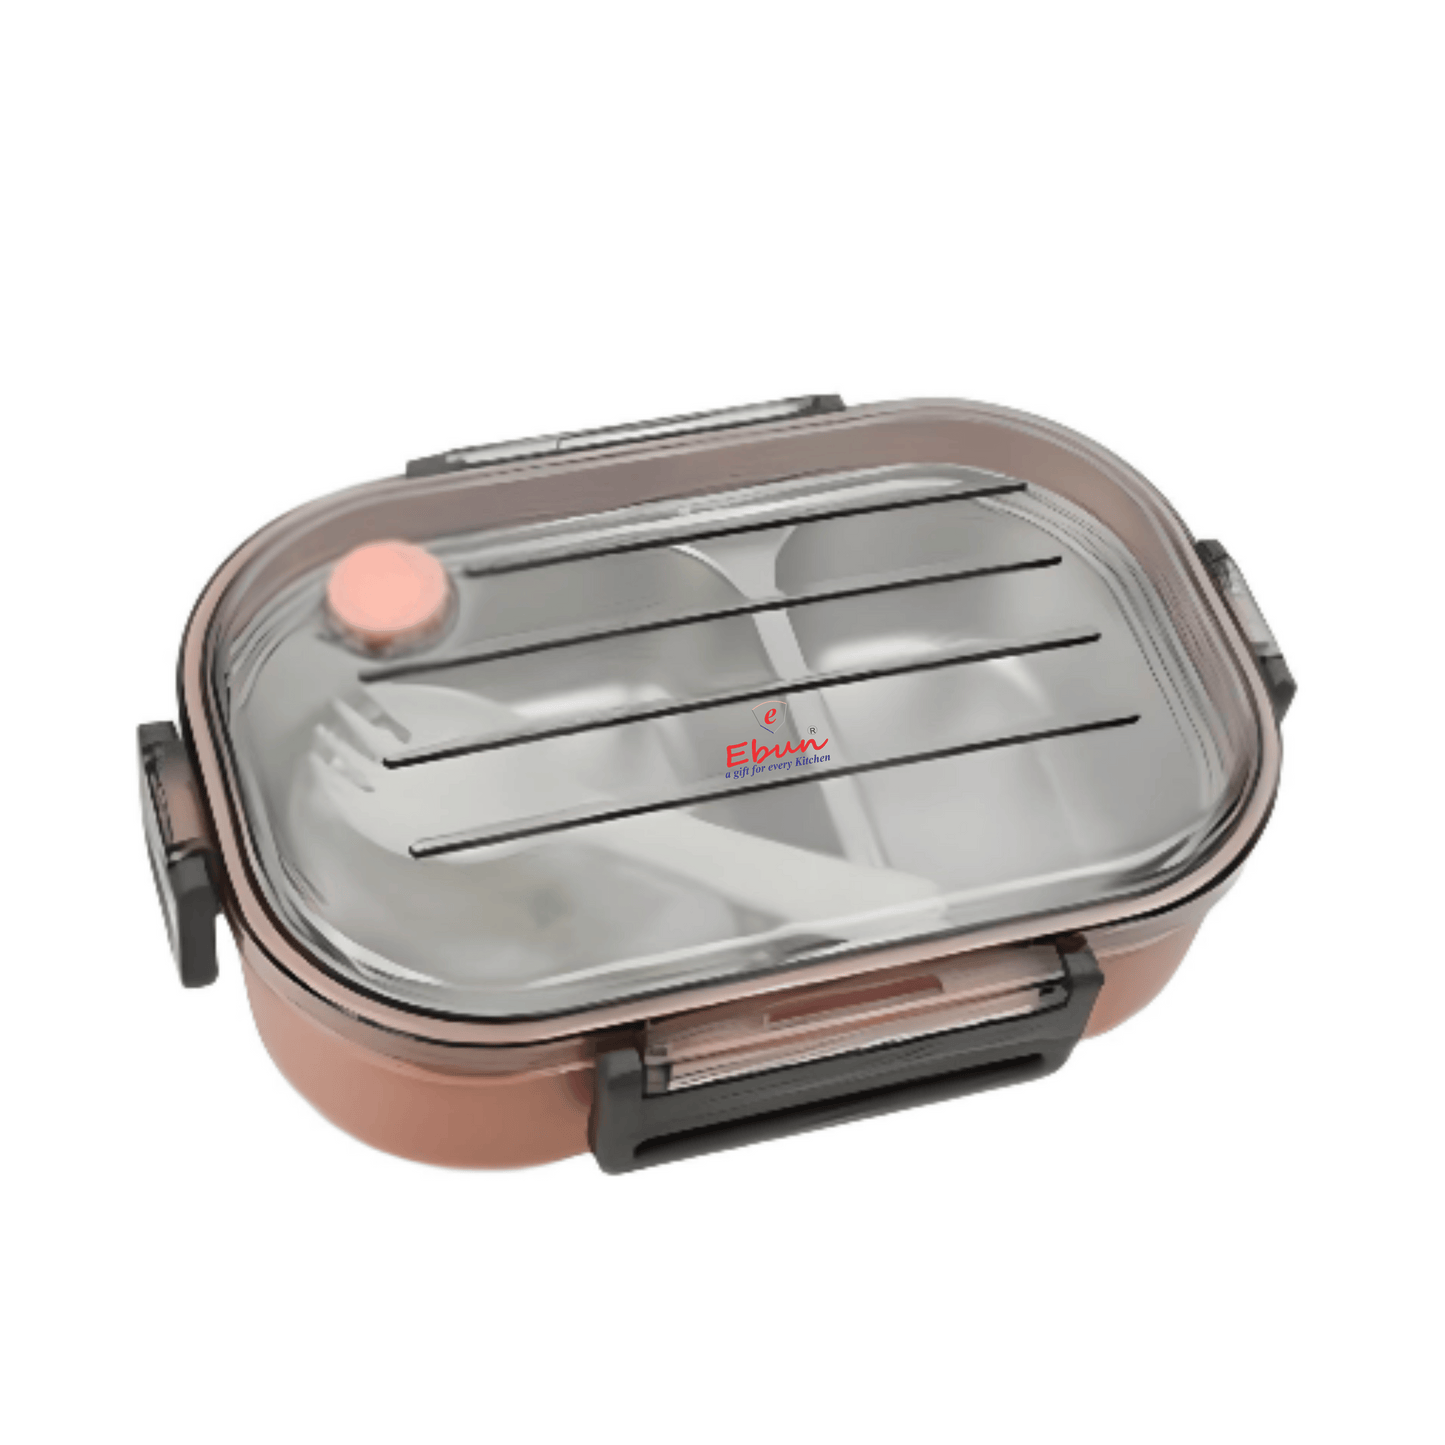 Stainless Steel Lunch Box for Kids for School - 500 Ml